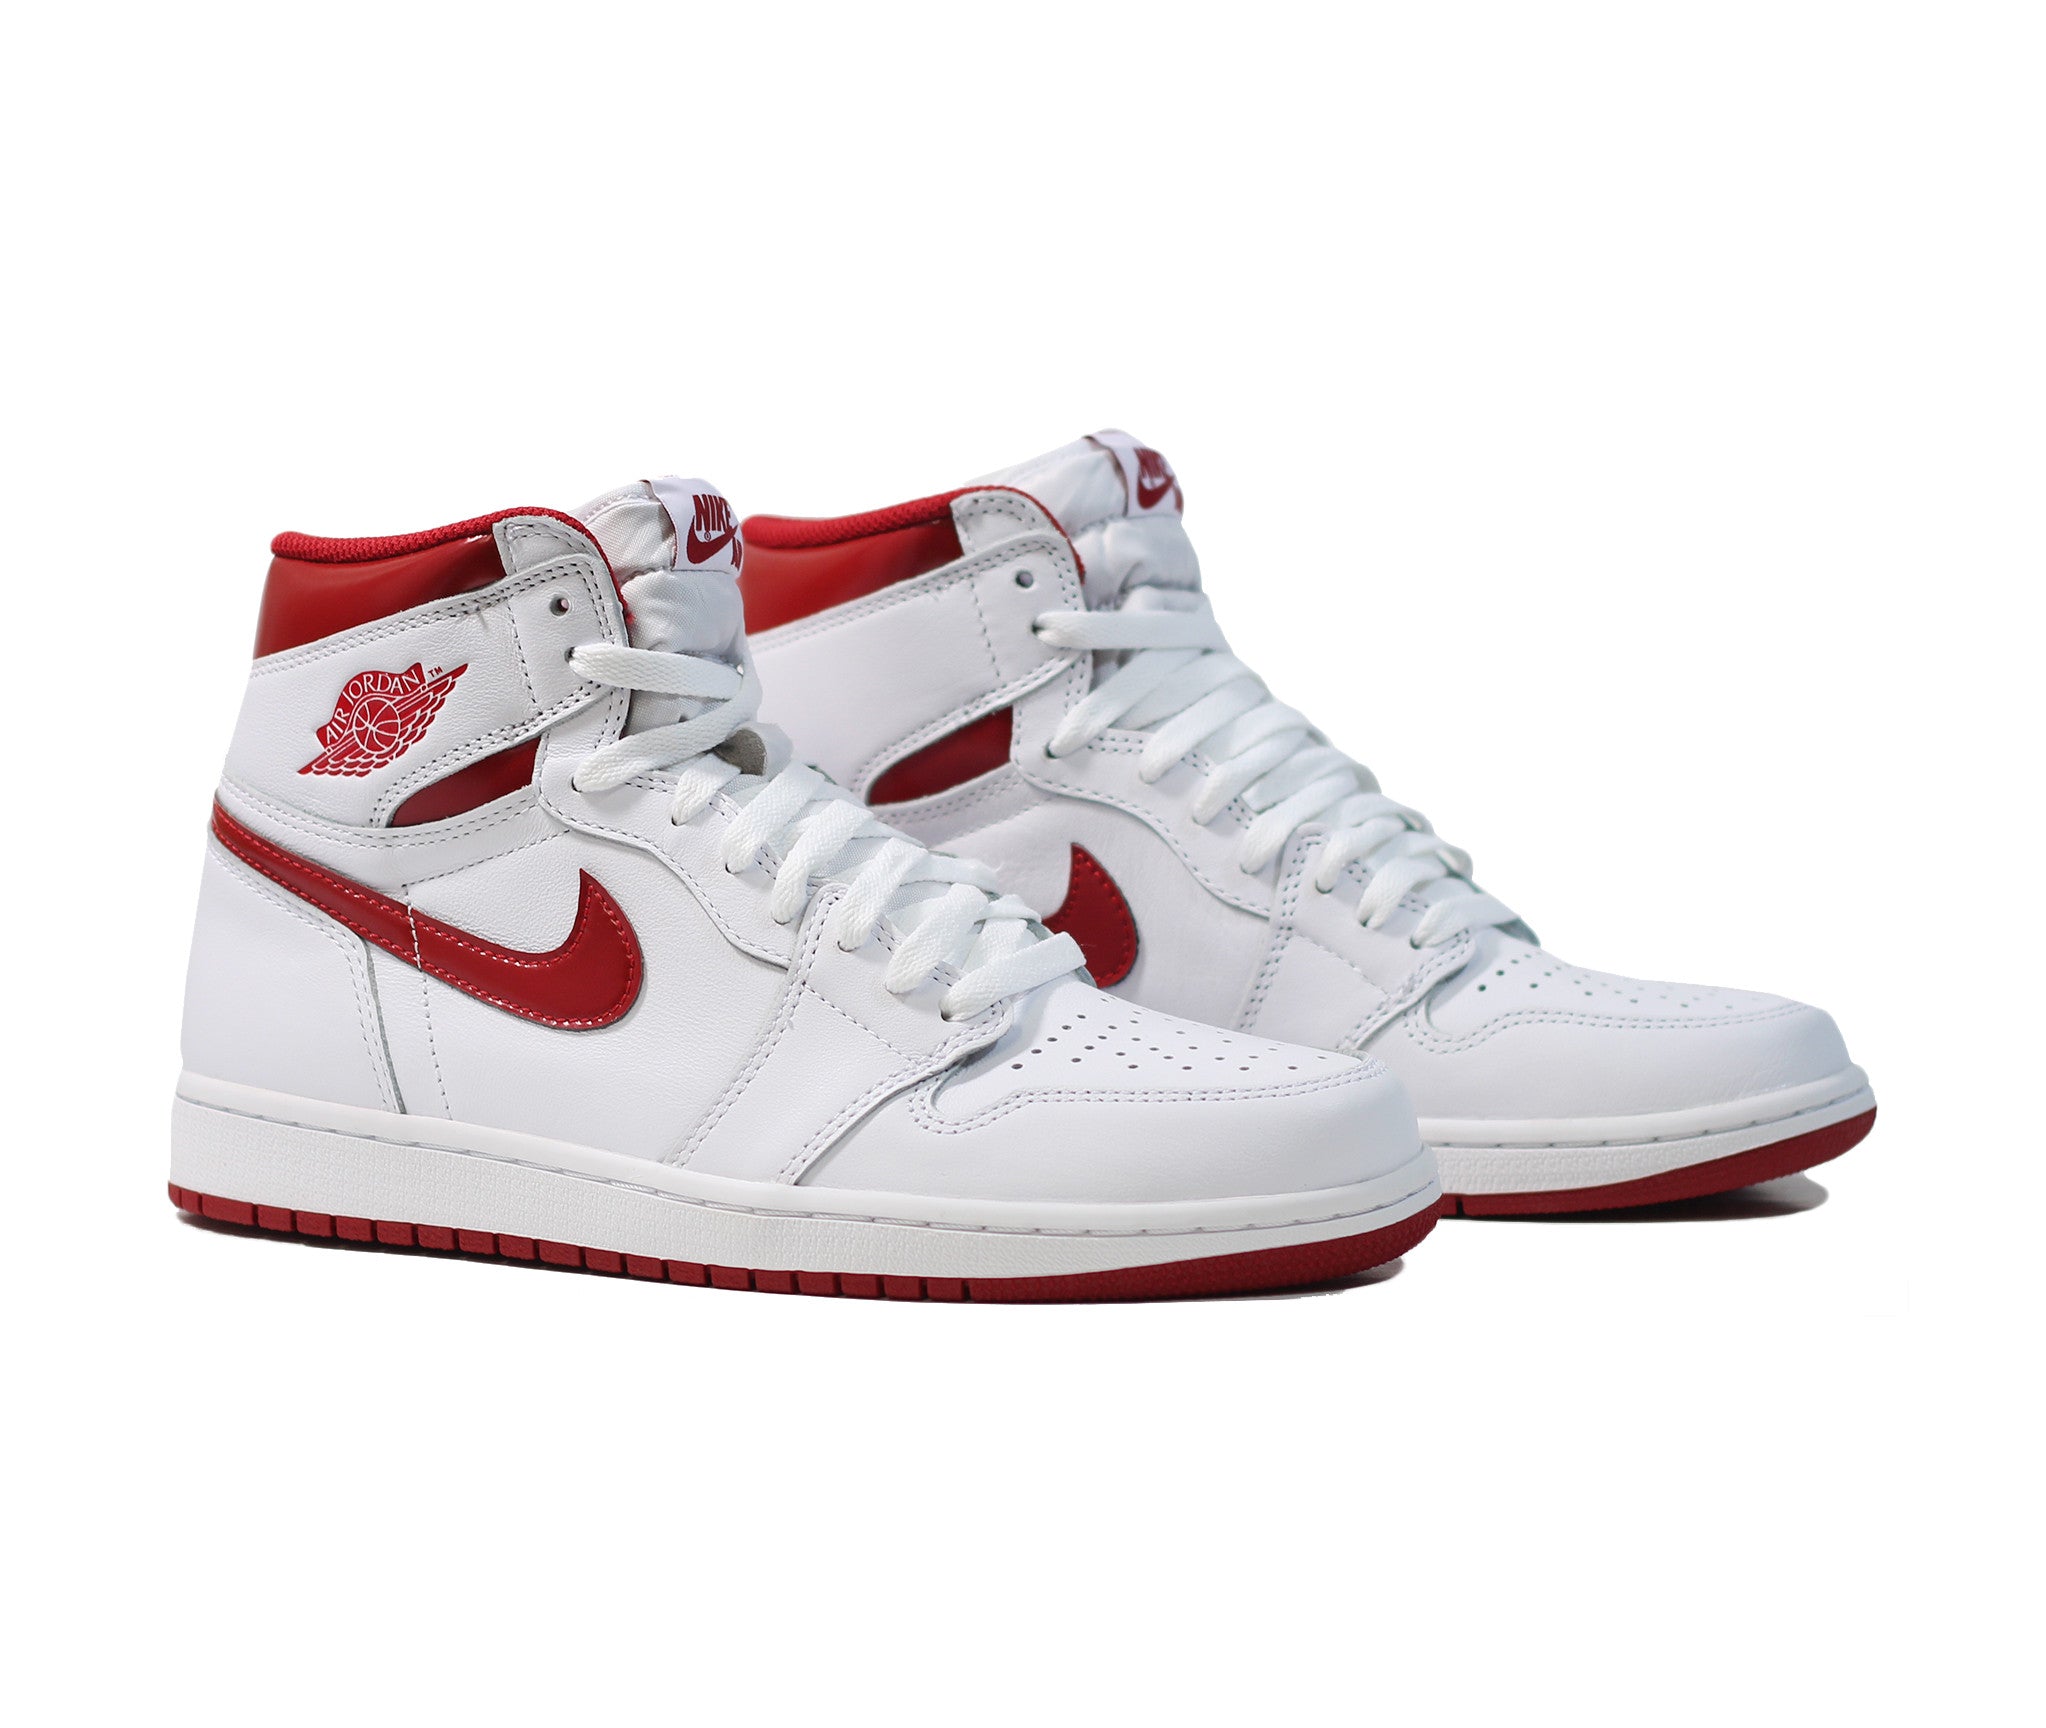 1s red and white